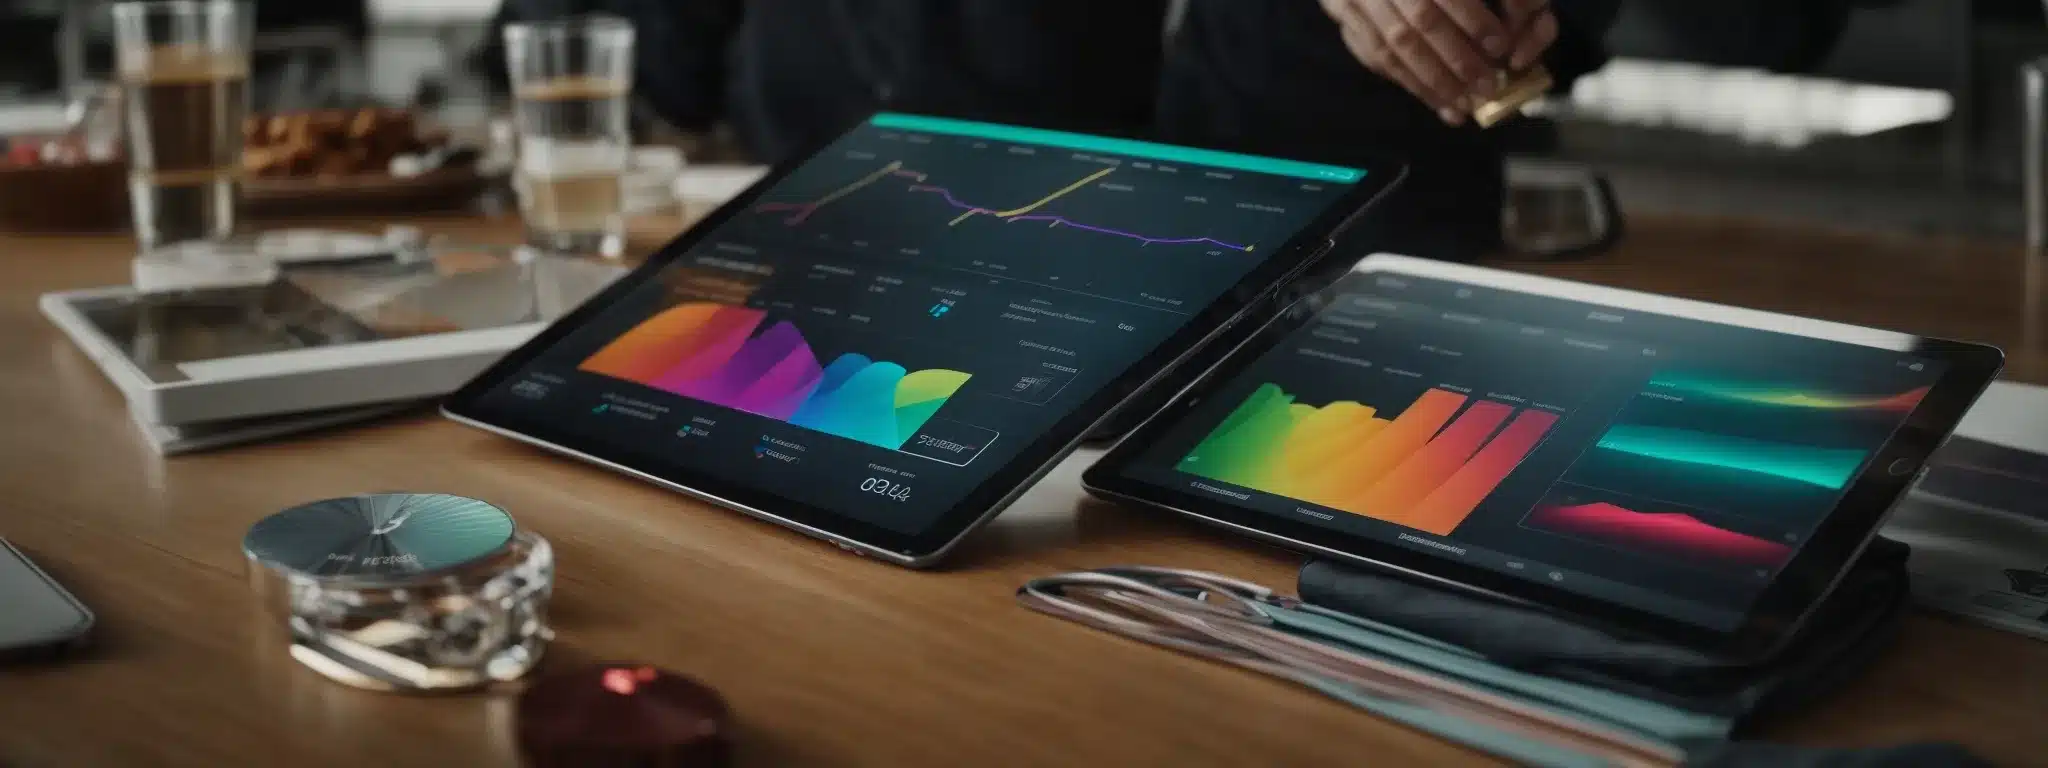 A Marketer Analyzes A Colorful Dashboard On A Tablet To Craft Individualized Consumer Journeys.